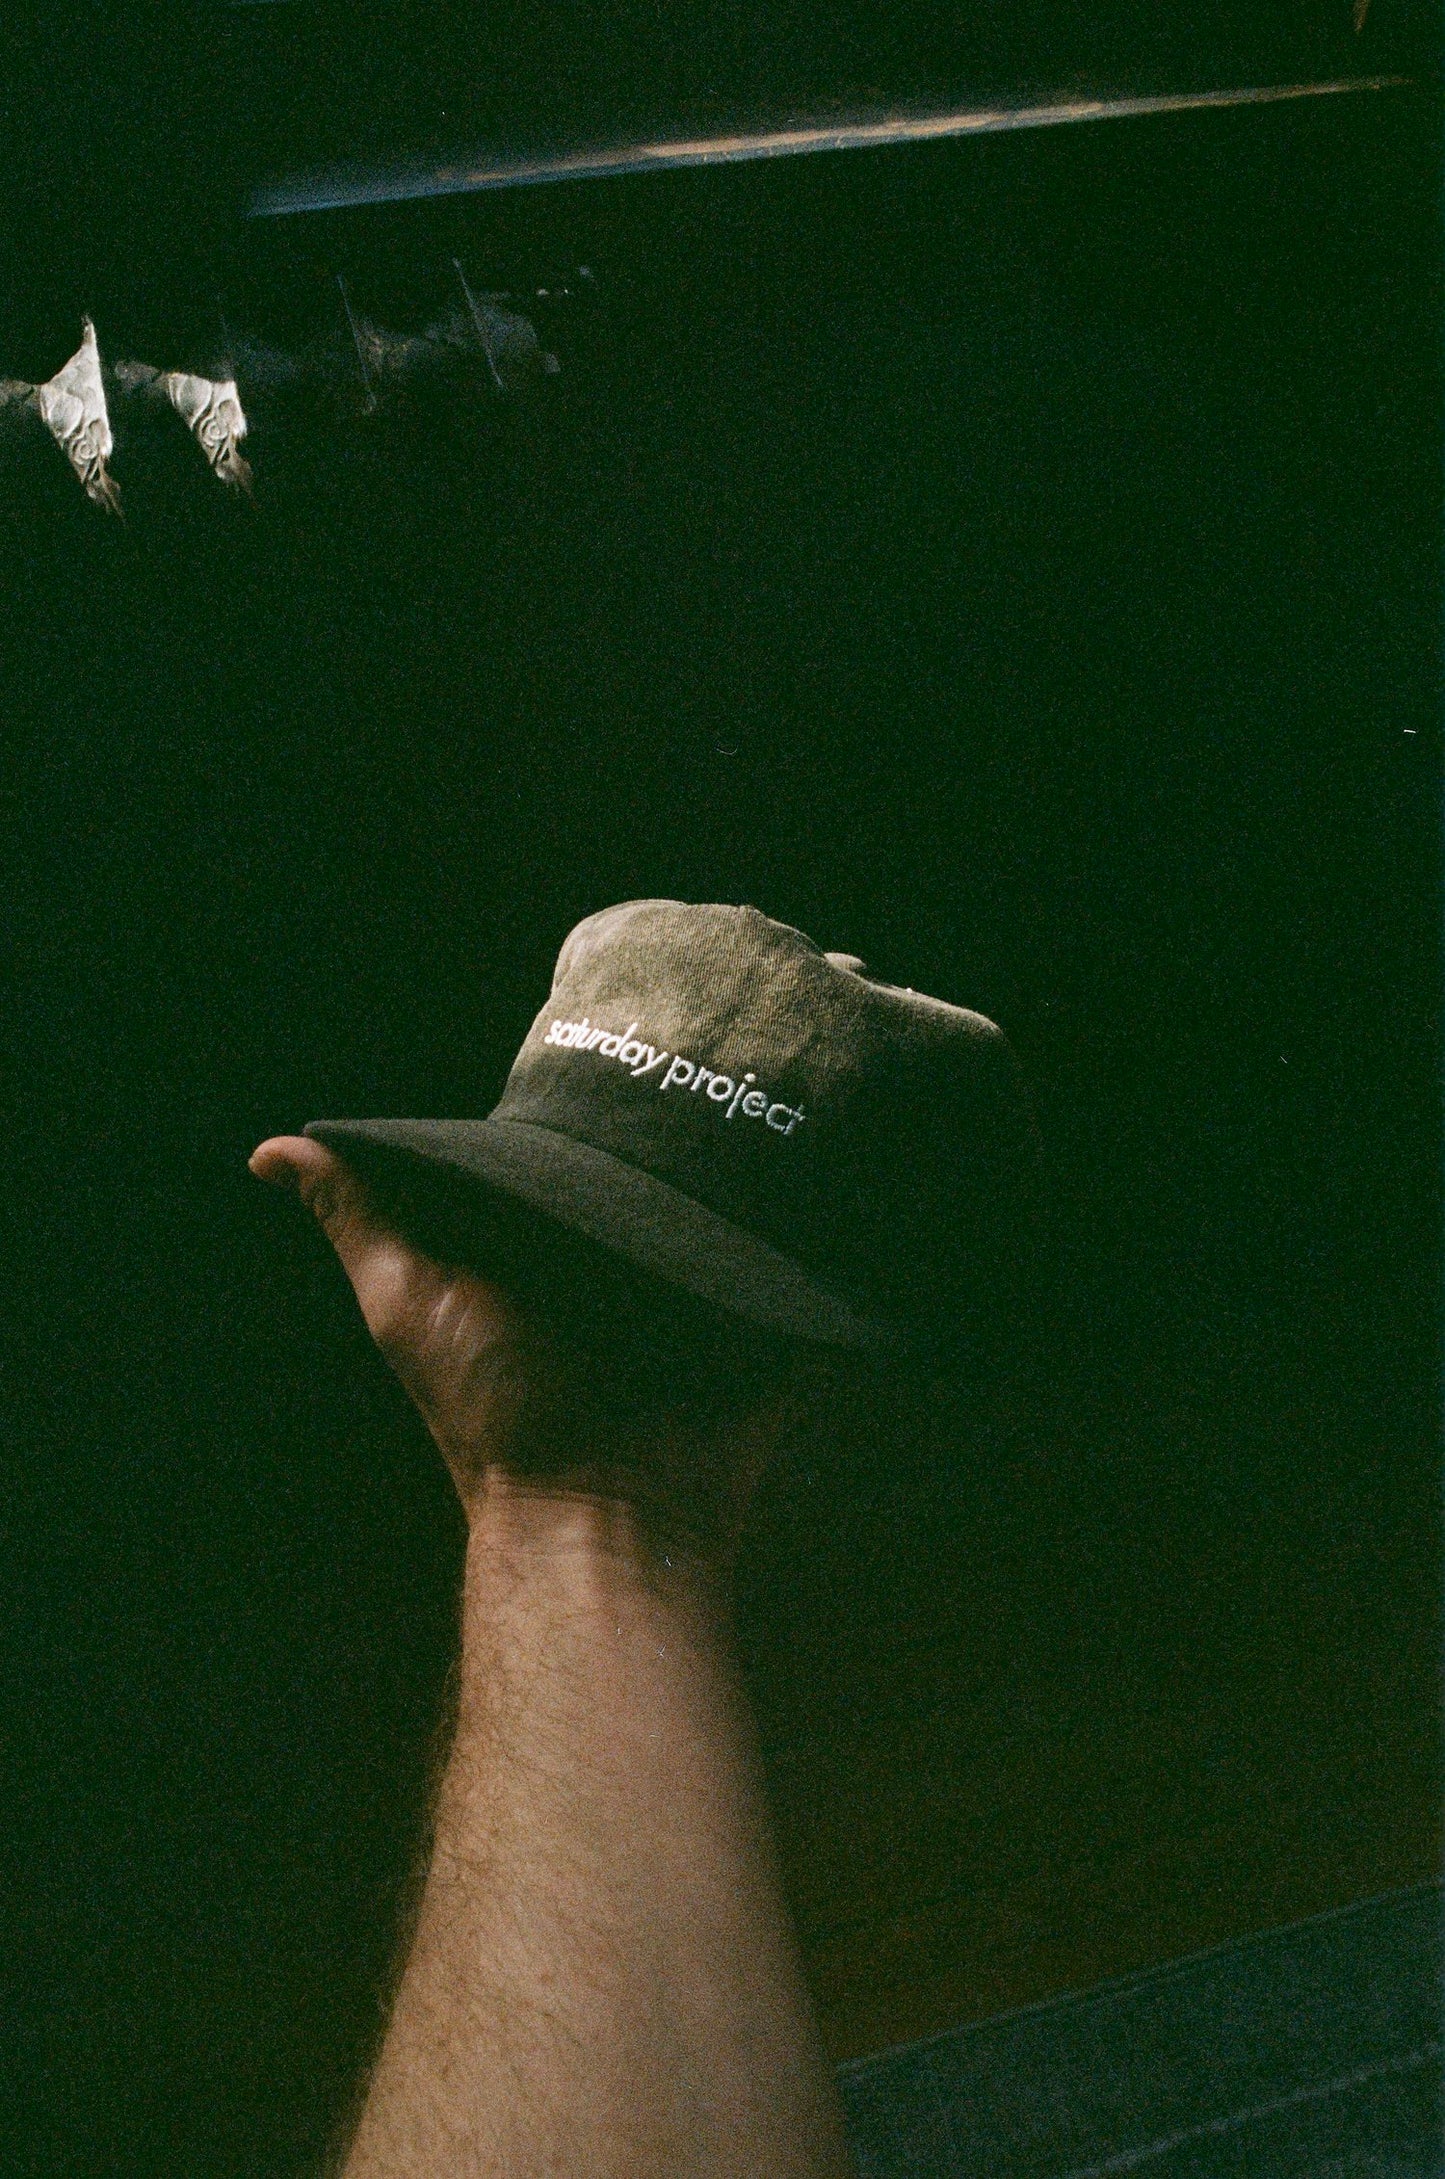 The Saturday Project - Strapback Hat - Vintage Brown